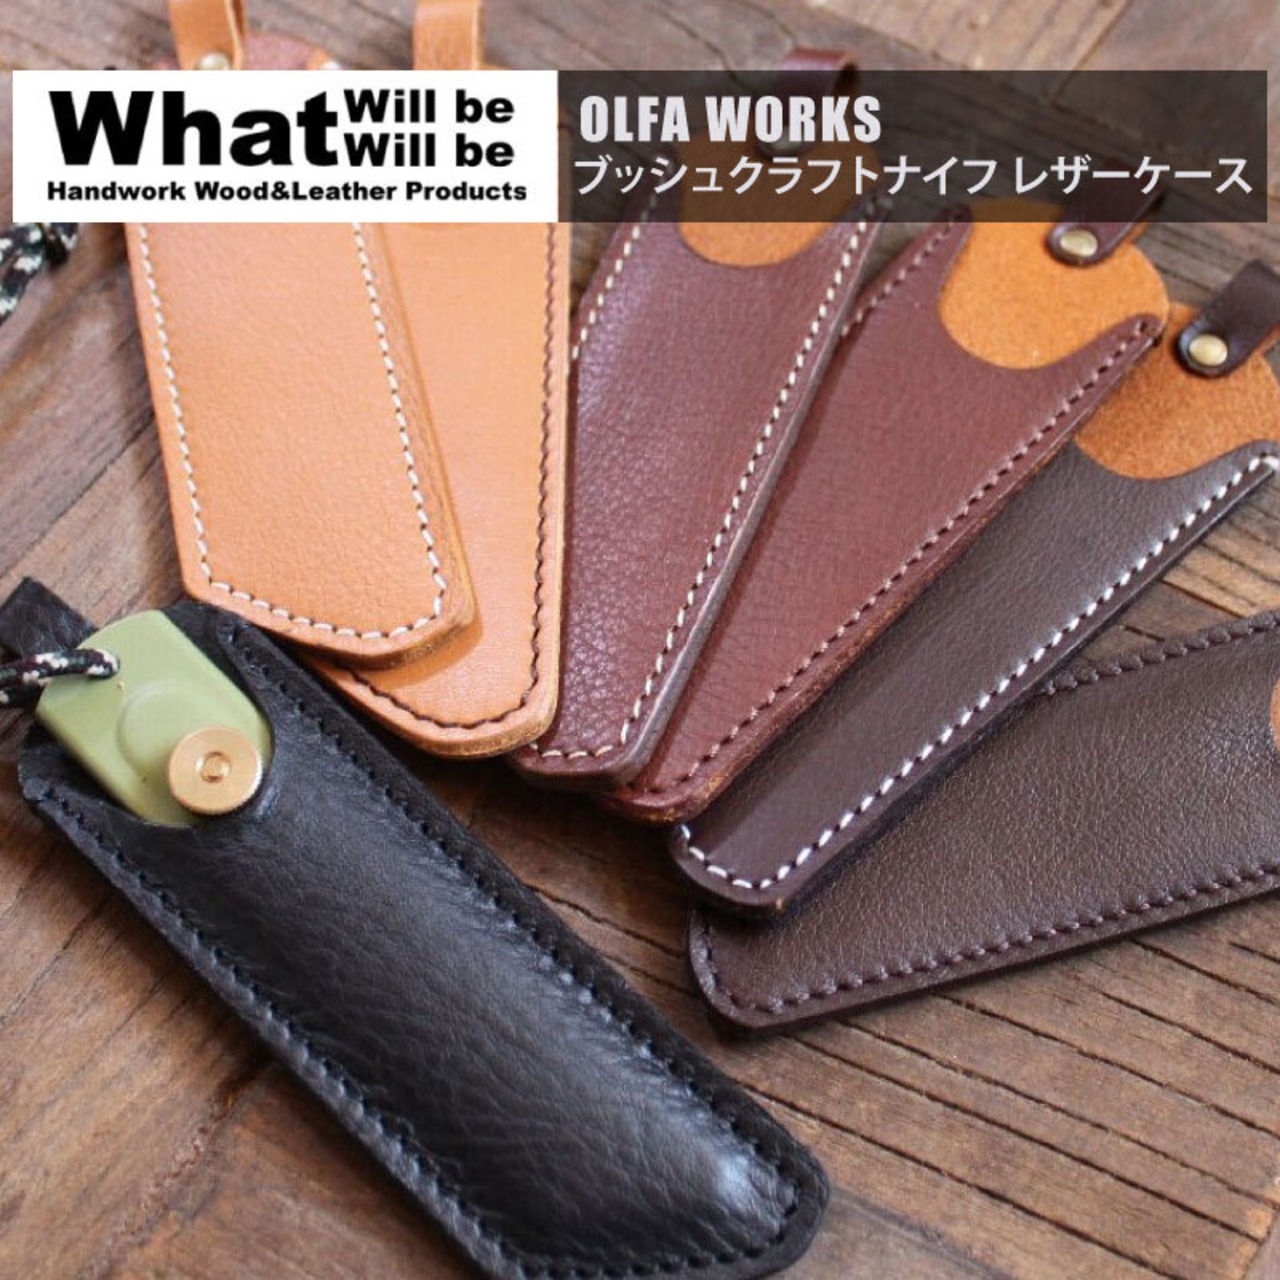 What will be will be OLFA WORKS ブッシュ クラフト ナイフ レザーケース